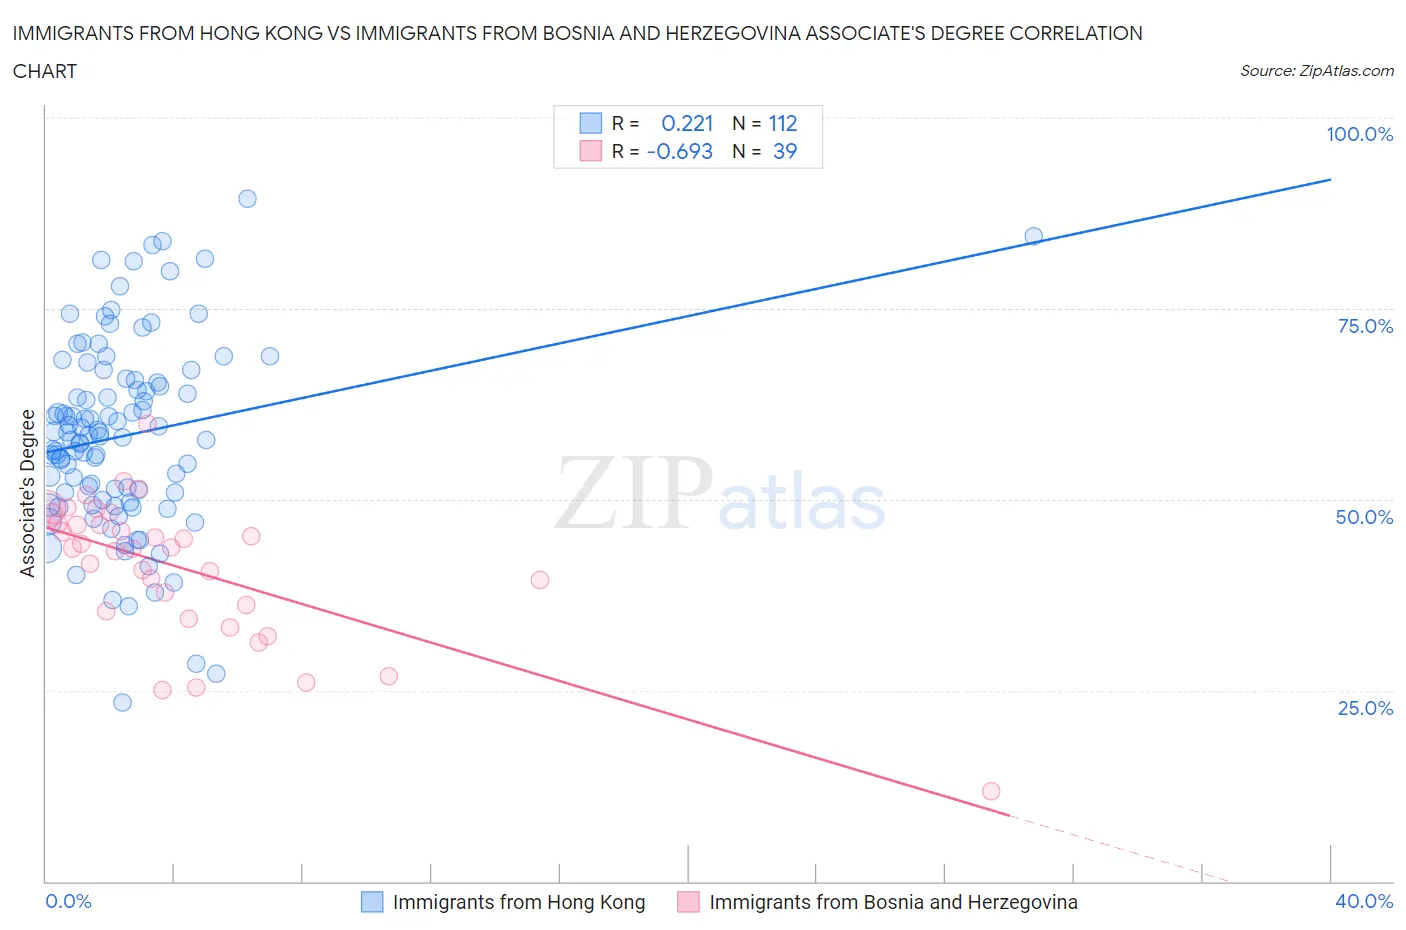 Immigrants from Hong Kong vs Immigrants from Bosnia and Herzegovina Associate's Degree